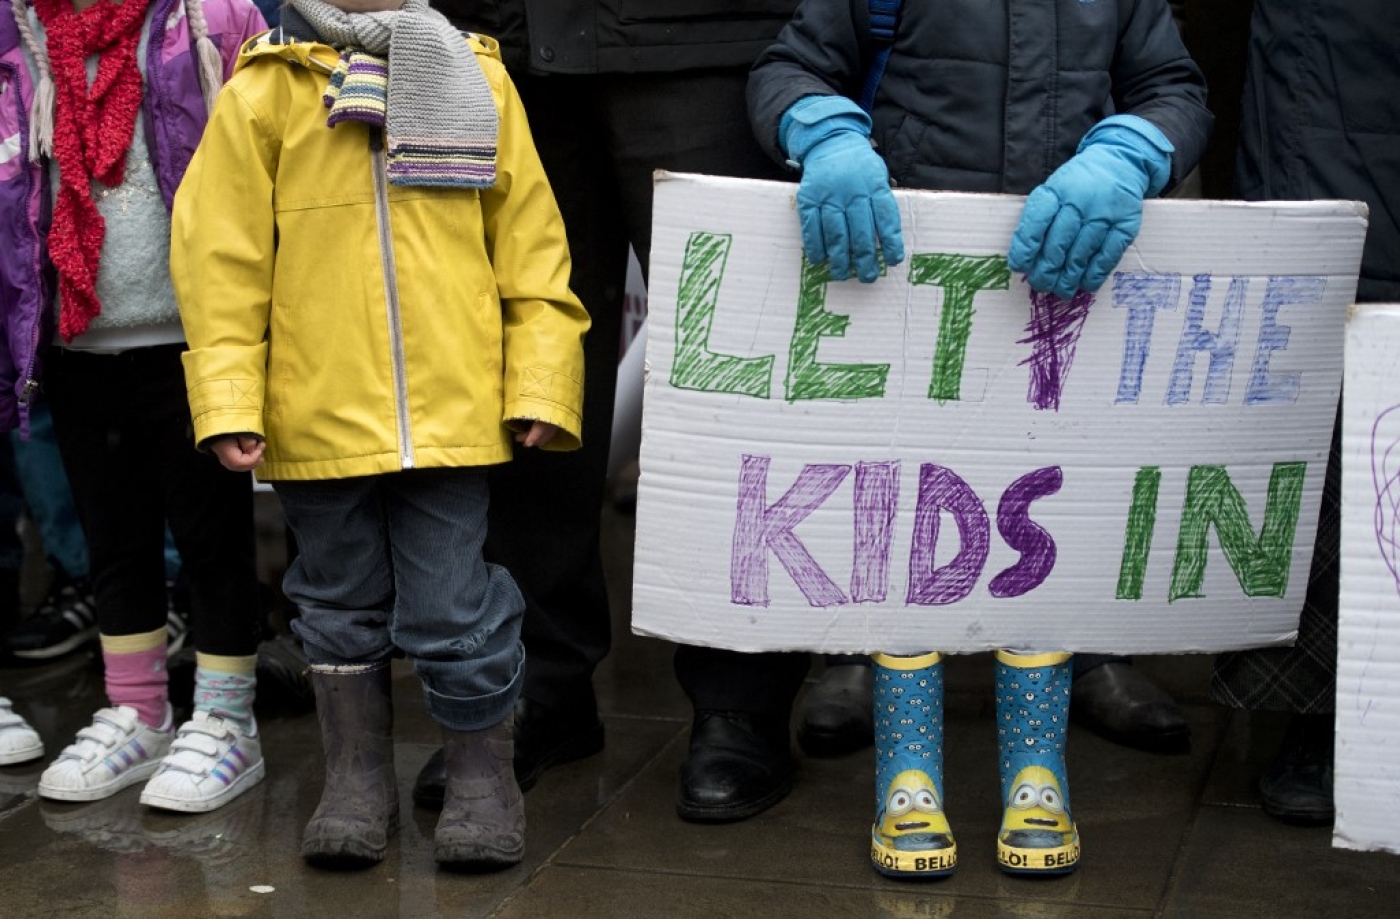 A child holds a placard that reads "Let the kids in" during a protest for refugees in London on February 11, 2017 (AFP) 